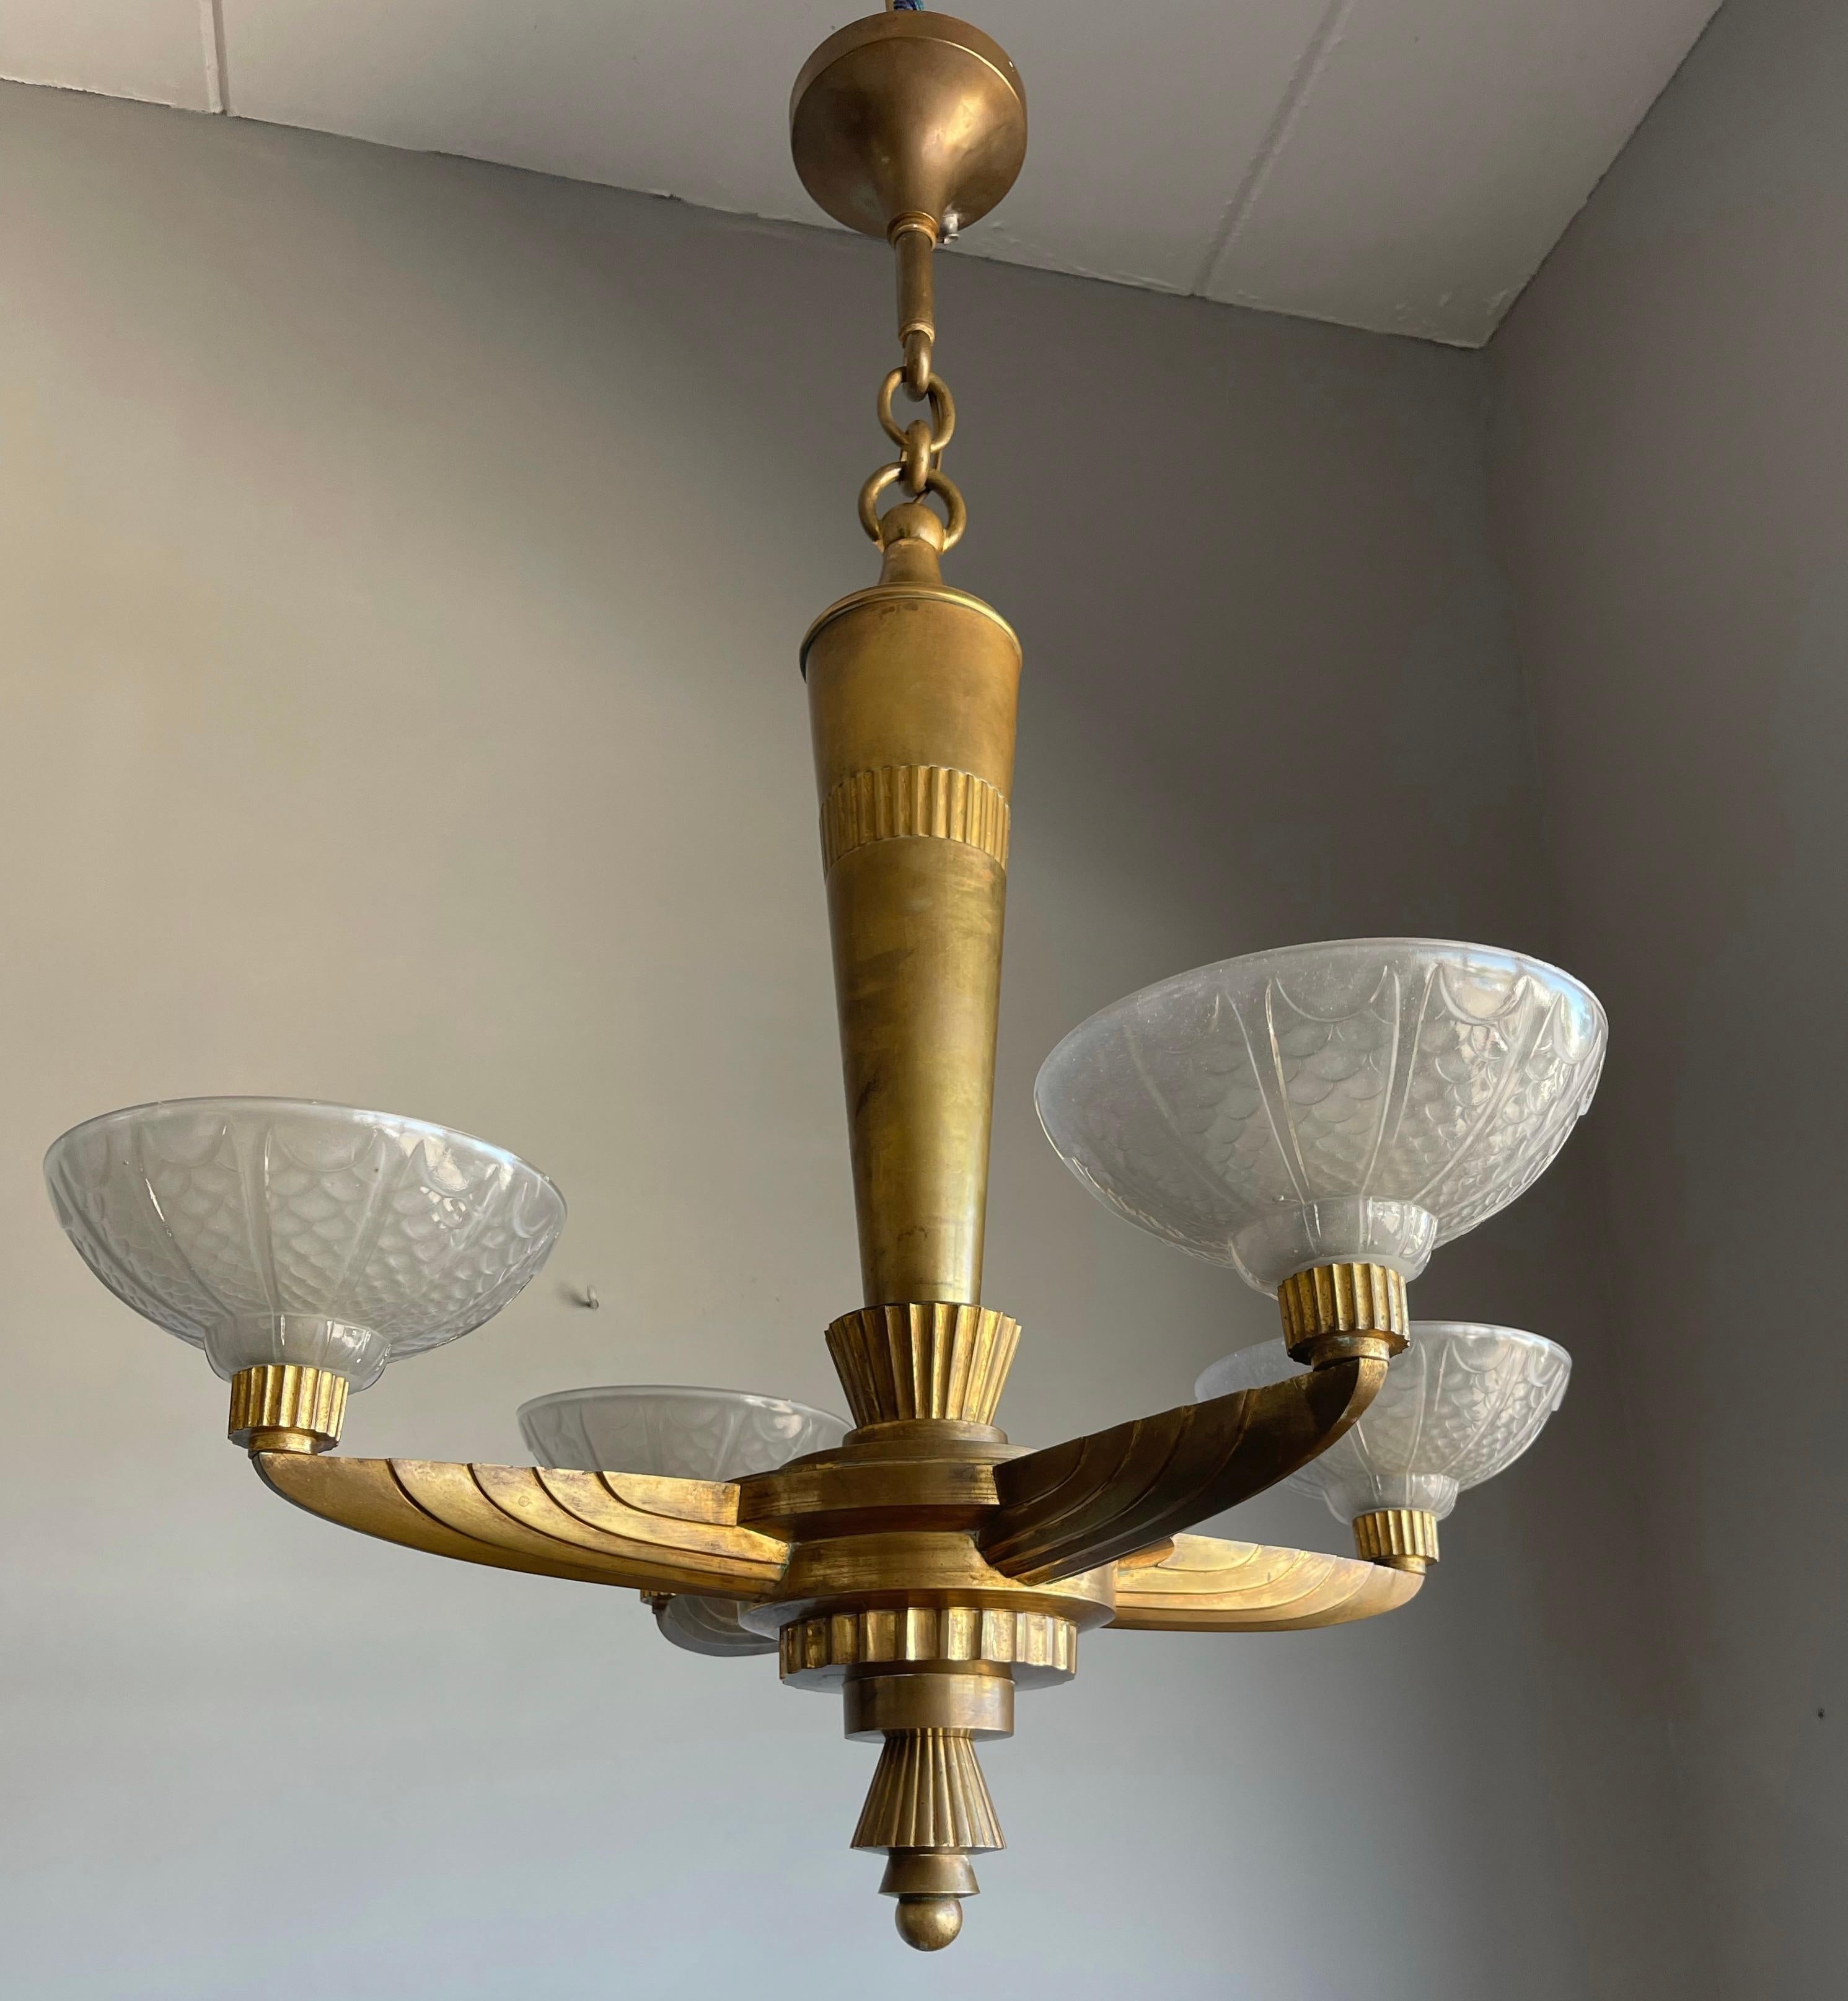 Truly beautiful and practical in size, 4-light Art Deco light fixture.

With early 20th century lighting as one of our passions, we never cease to be amazed with the variety, quality and beauty of the light fixtures that were made in those days.